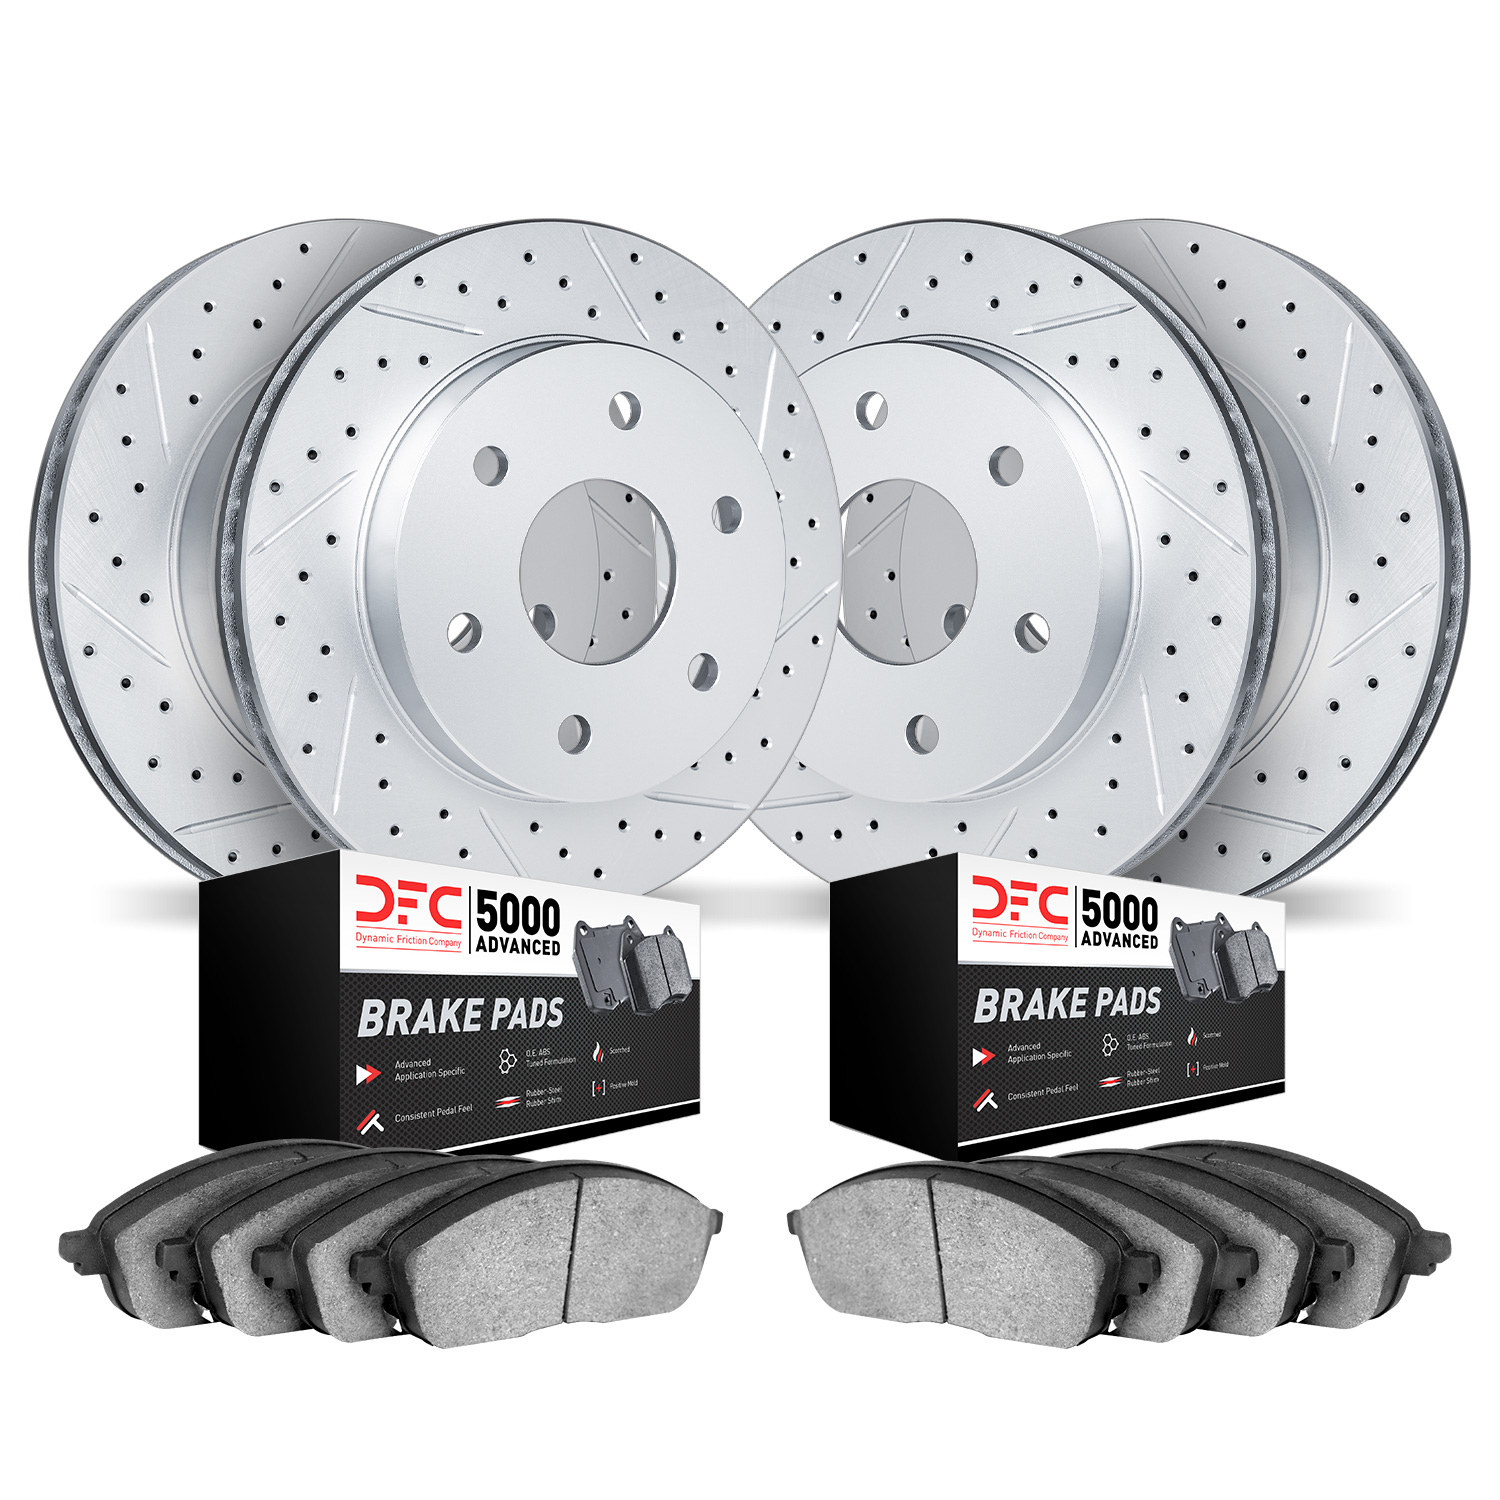 2504-40098 Geoperformance Drilled/Slotted Rotors w/5000 Advanced Brake Pads Kit, 2003-2003 Mopar, Position: Front and Rear